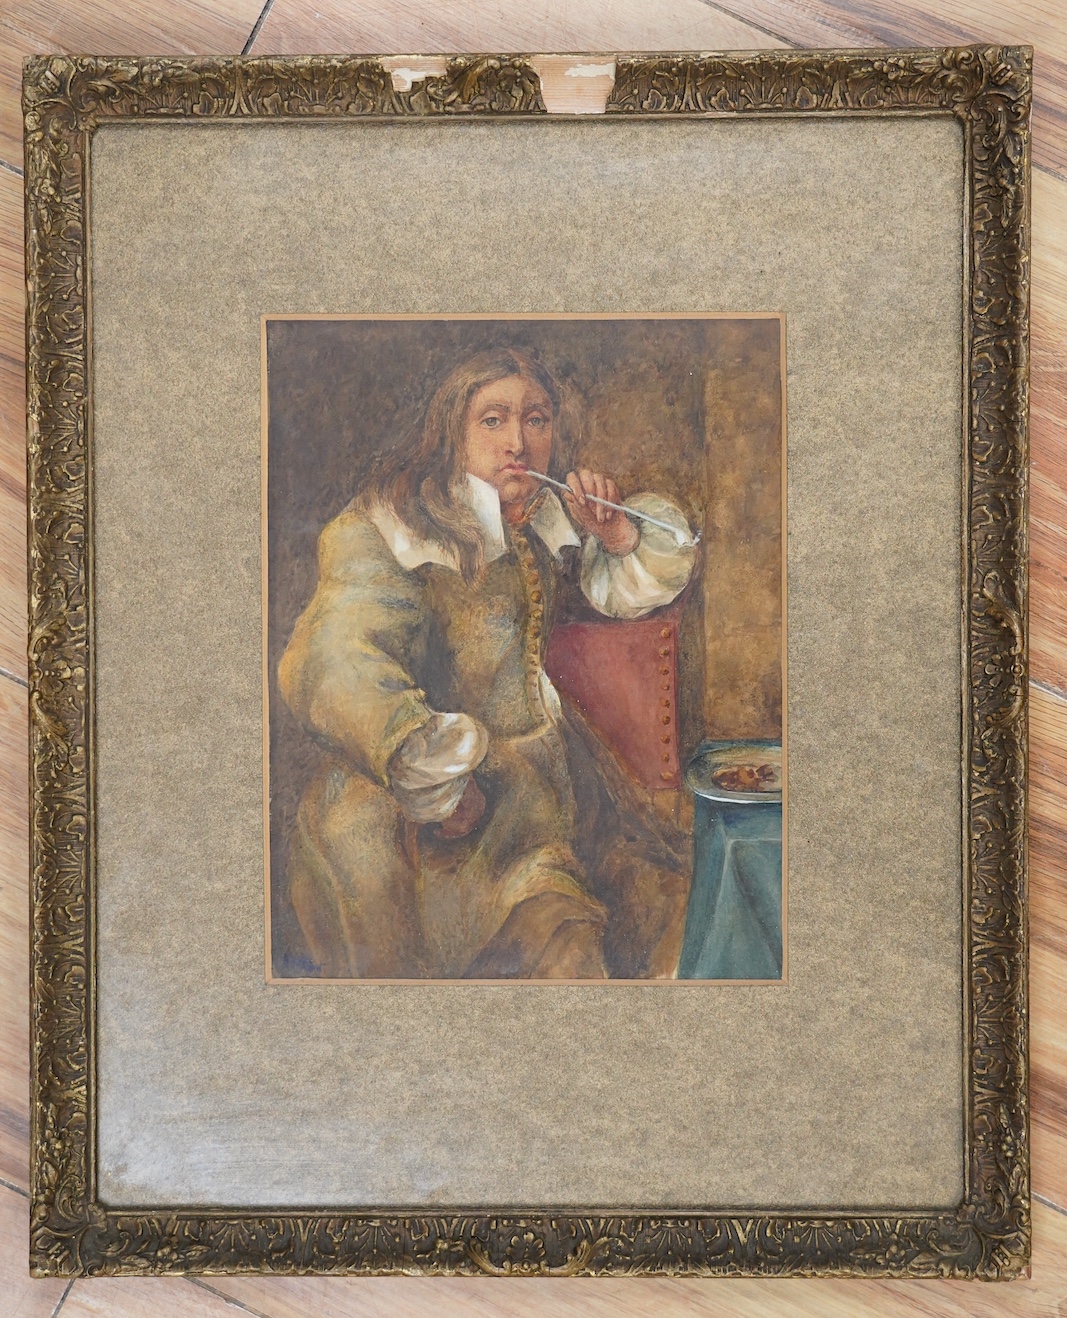 Late 19th century English School, watercolour, Portrait of a 17th century gentleman smoking a pipe, indistinctly signed lower left, 22 x 17cm. Condition - fair